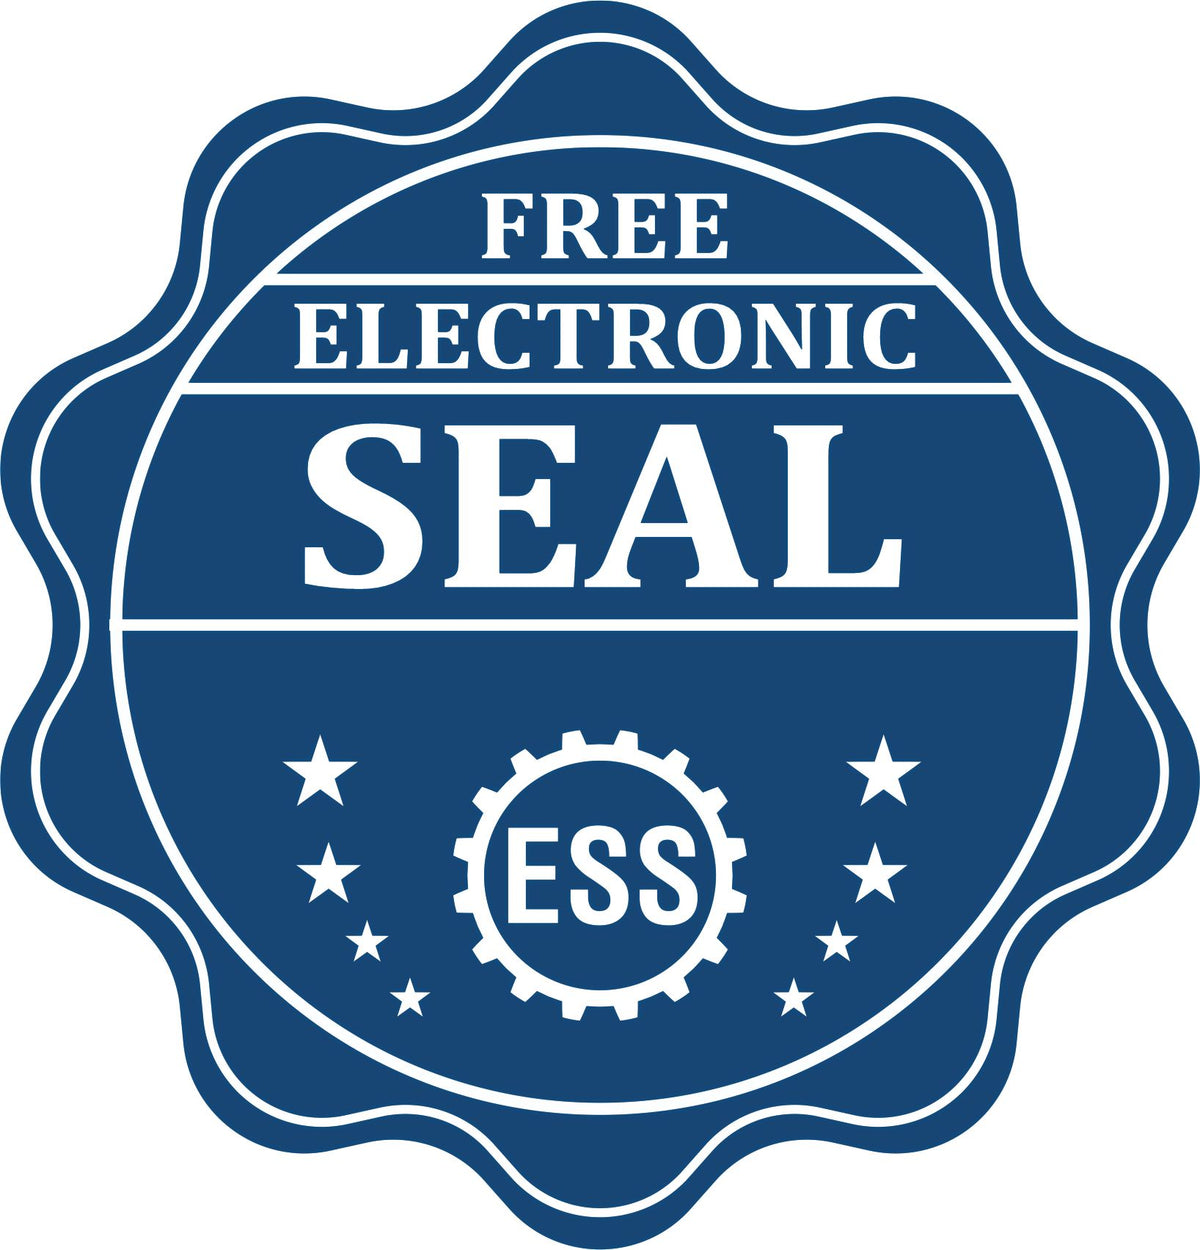 A badge showing a free electronic seal for the Heavy Duty Cast Iron New Jersey Engineer Seal Embosser with stars and the ESS gear on the emblem.